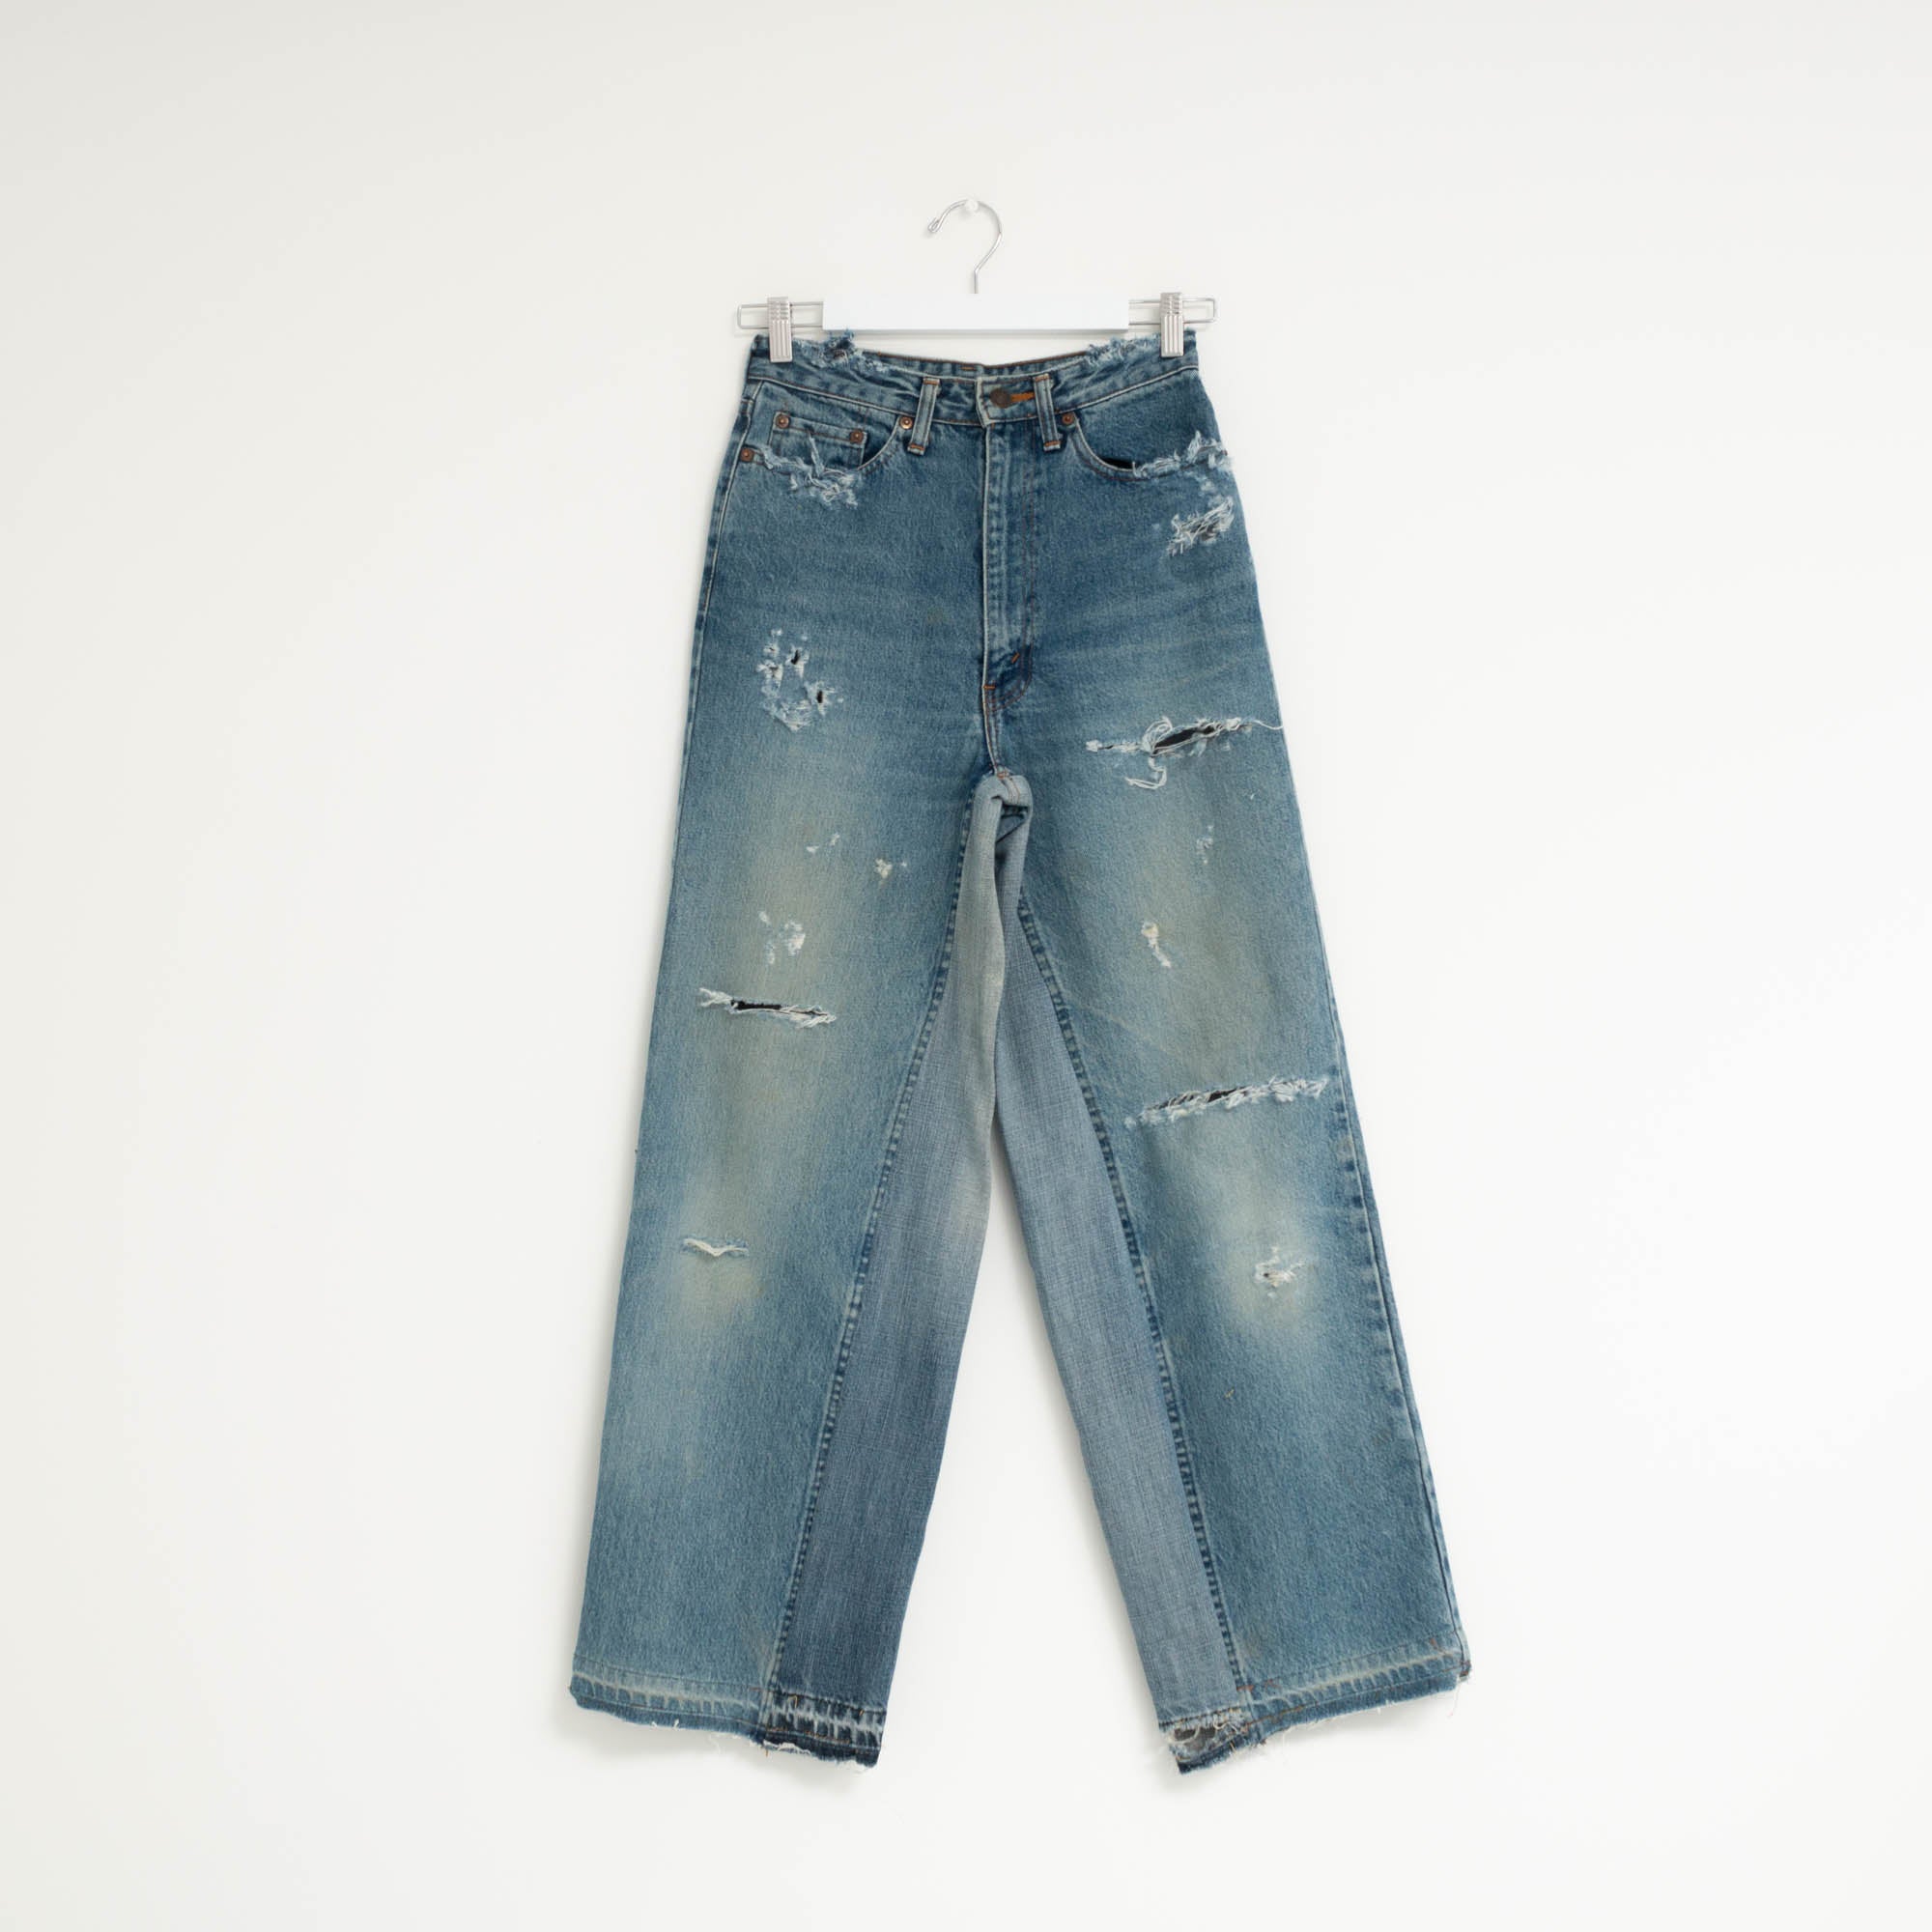 "FLARE" Jeans W26 L30